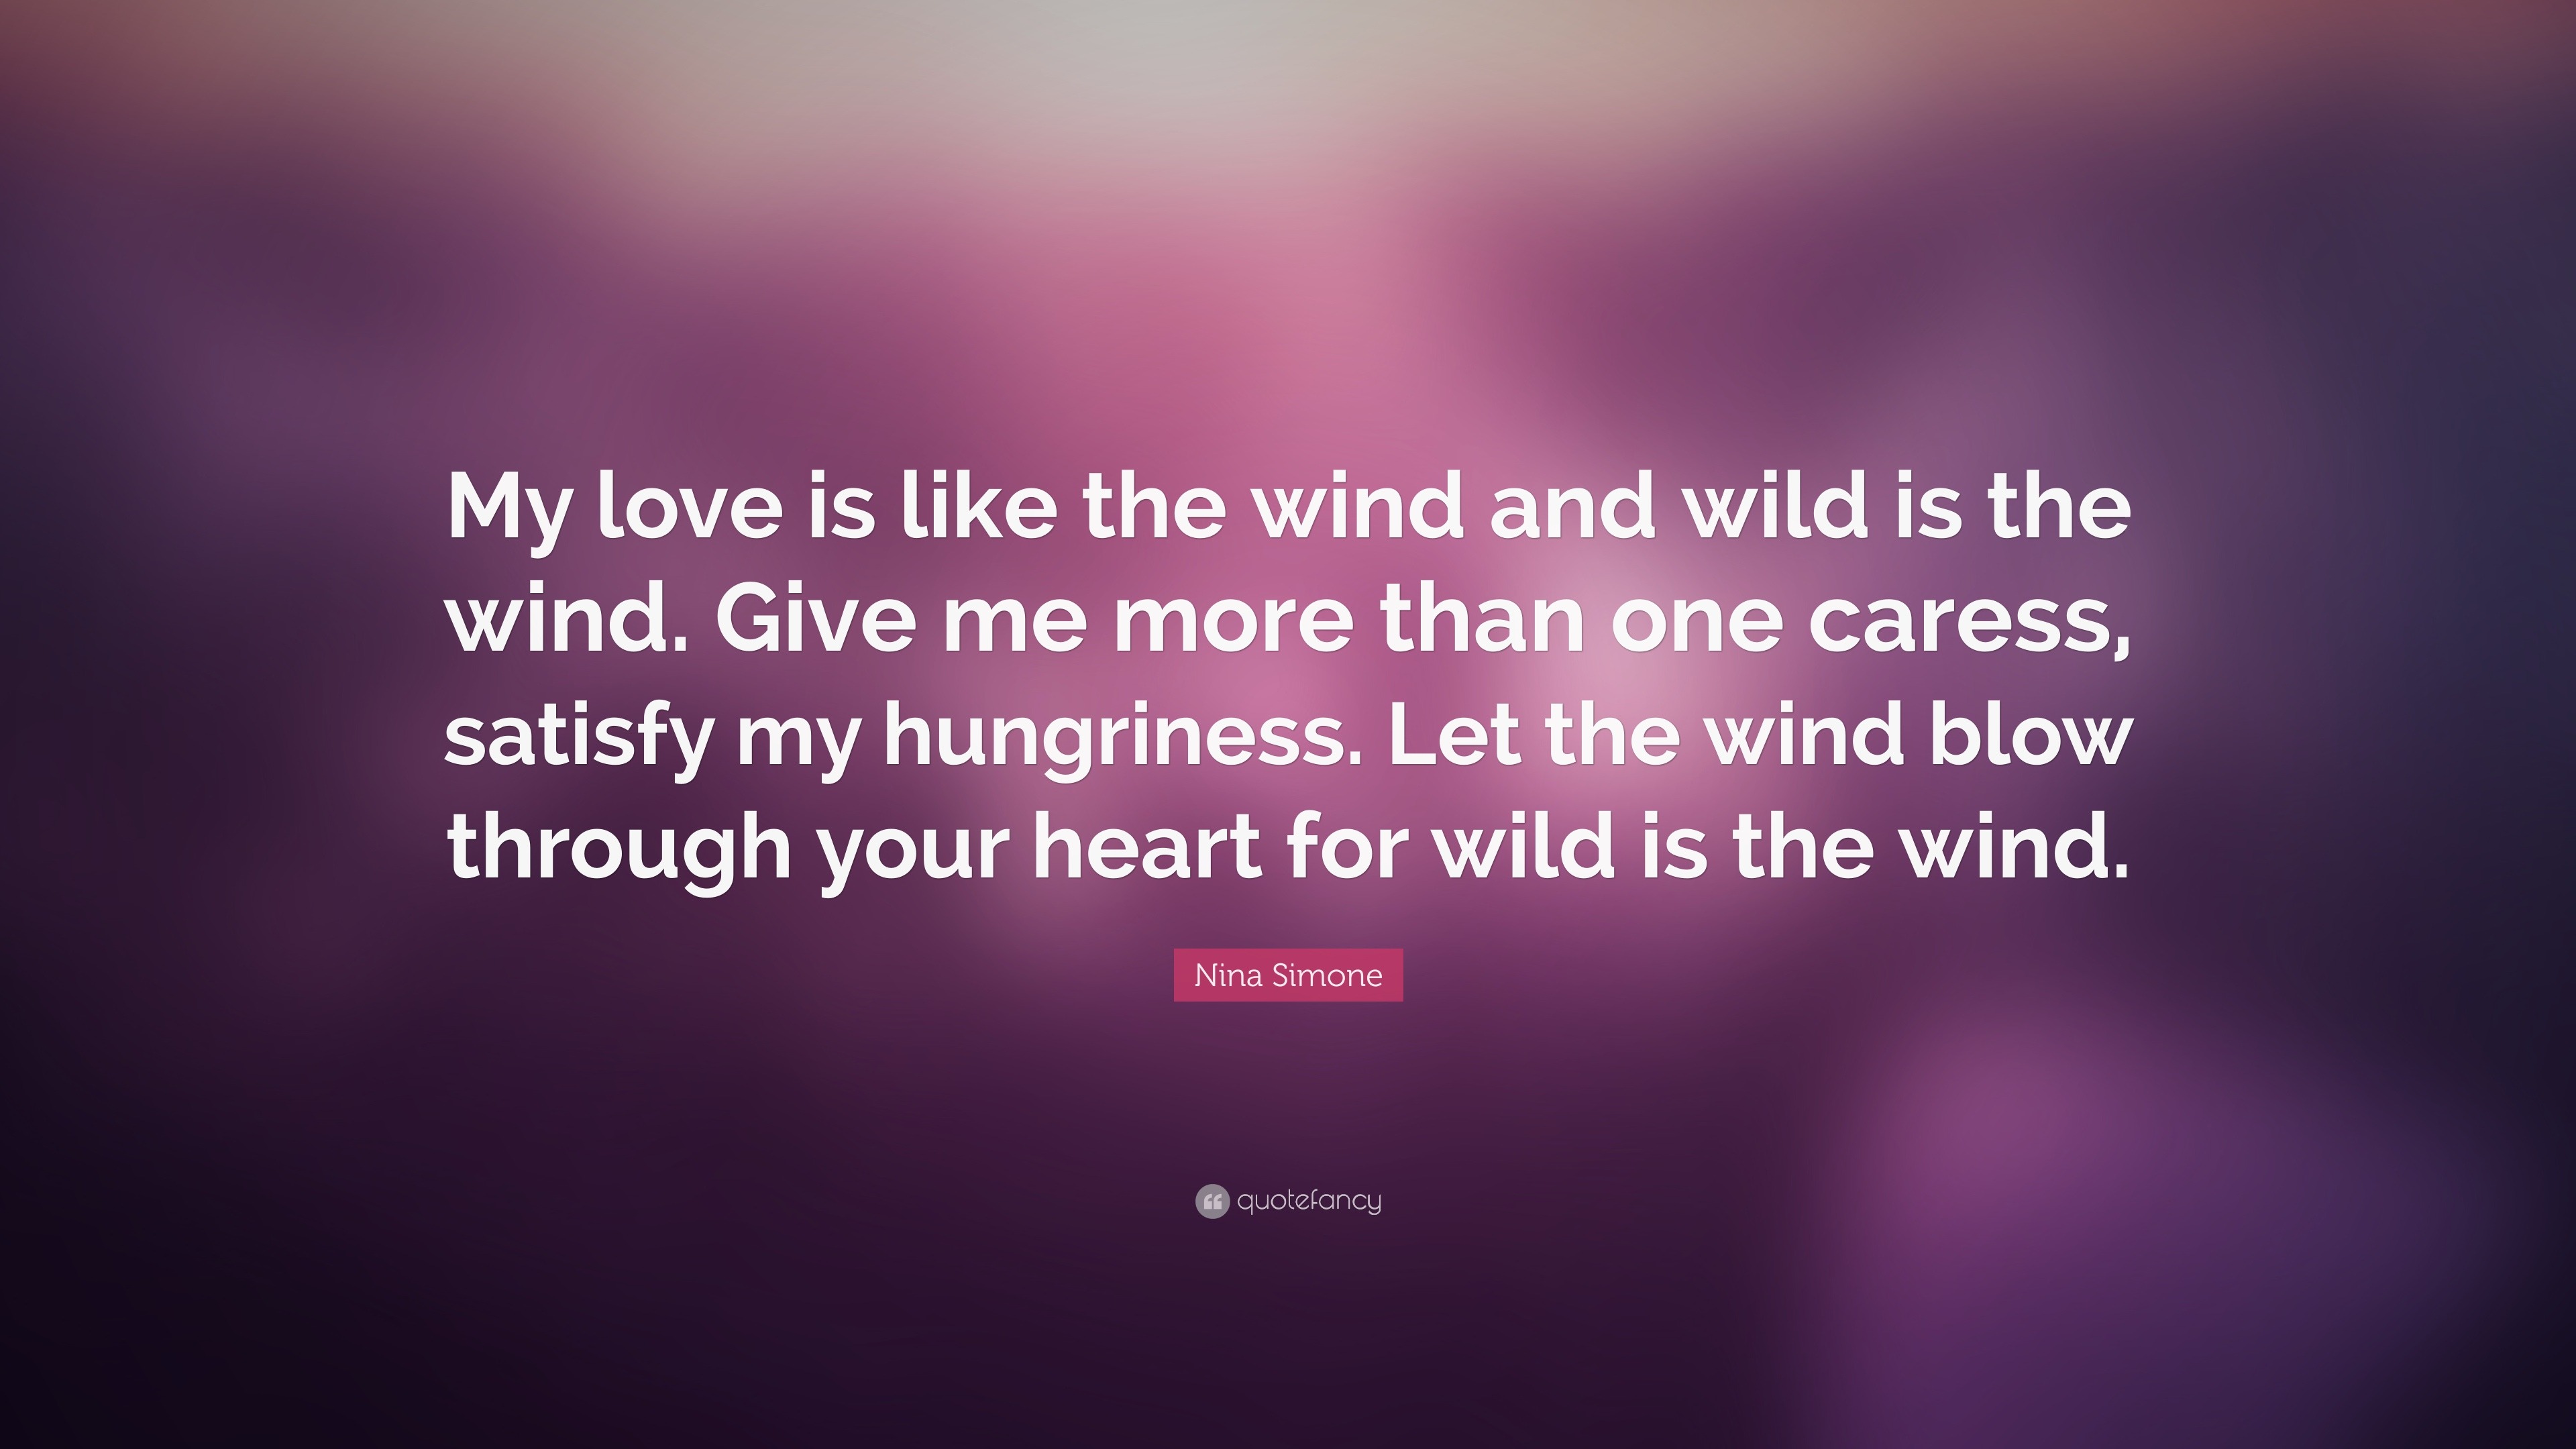 Nina Simone Quote: "My love is like the wind and wild is the wind. Give me more than one caress ...